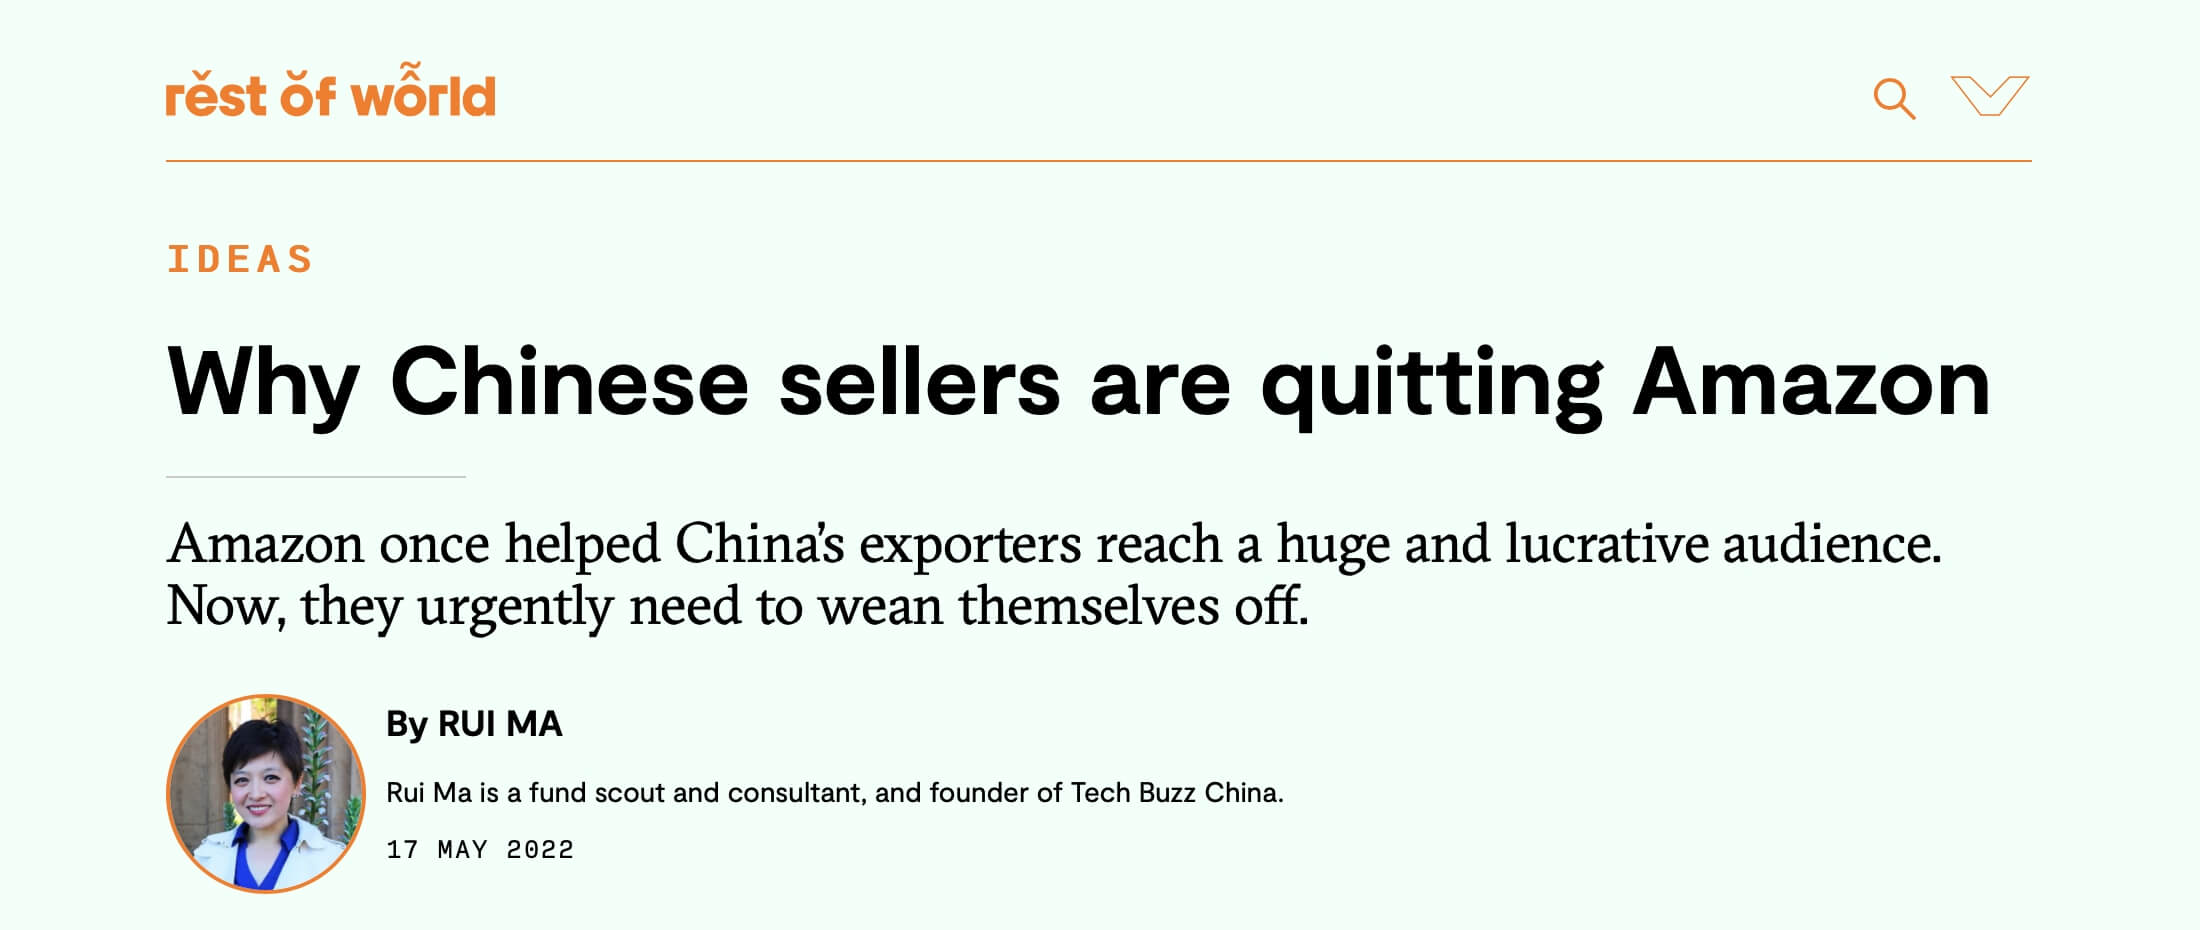  Why Chinese sellers are quitting Amazon - Rest of World